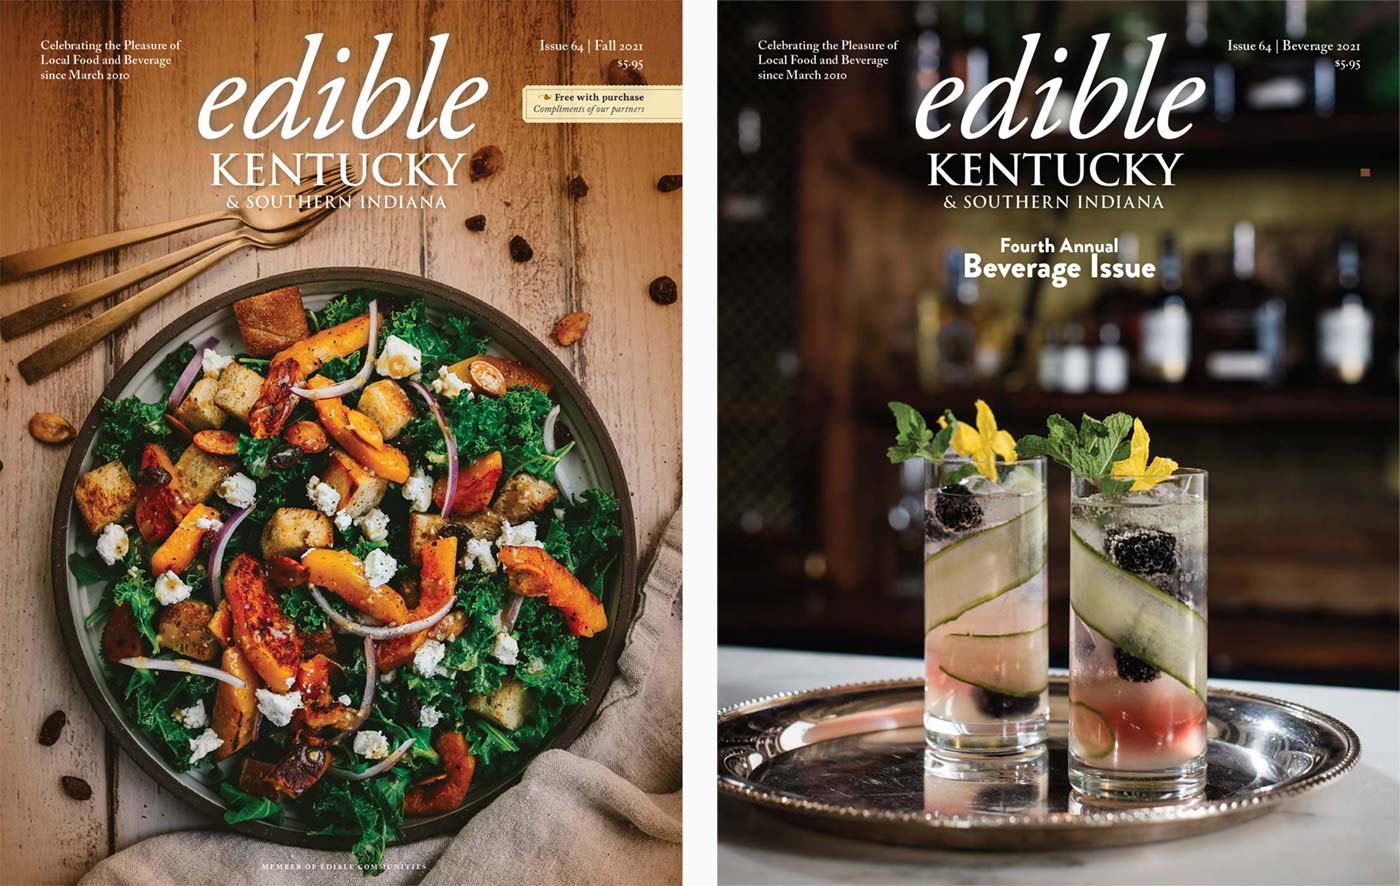 Edible Louisville Issue 64 Edible Kentucky And Southern Indiana 